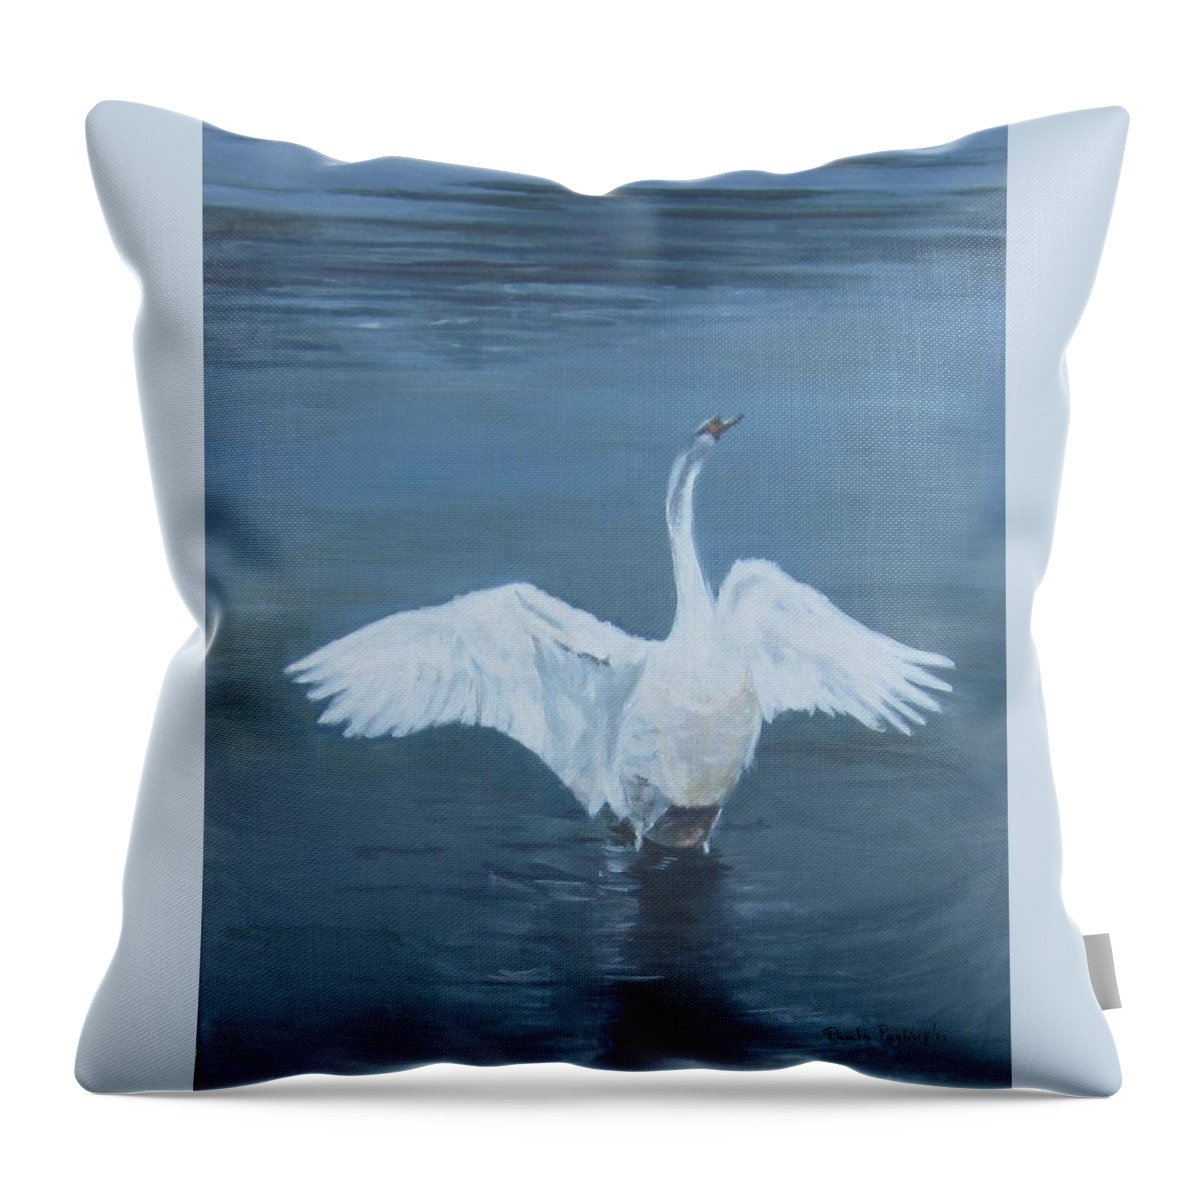 Acrylic Throw Pillow featuring the painting Let It Go by Paula Pagliughi